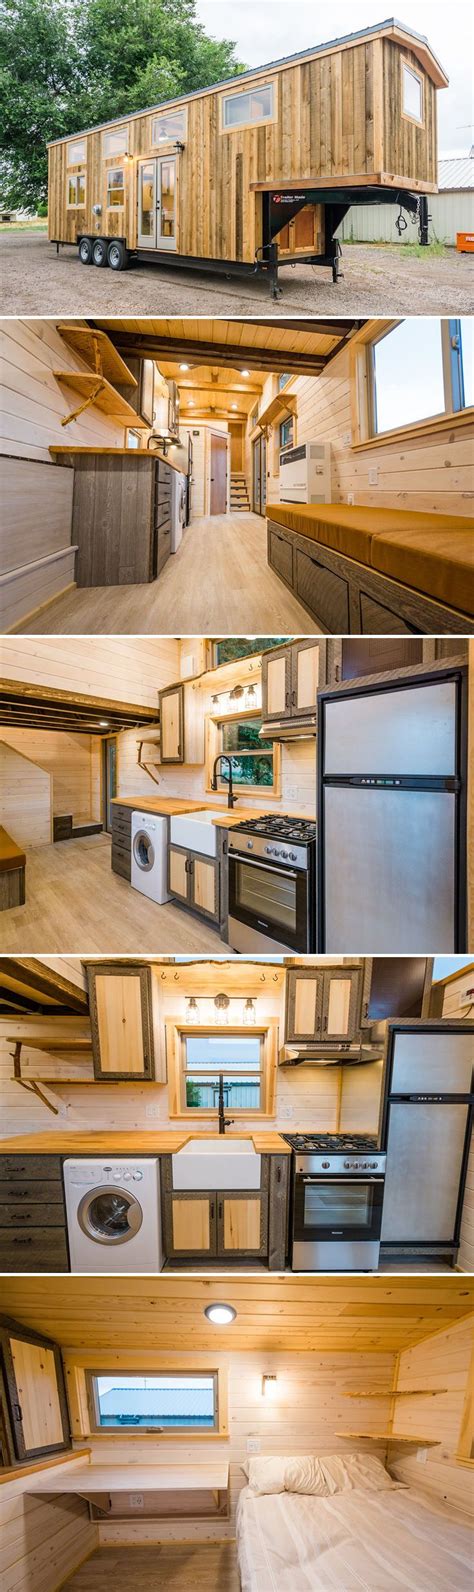 From Fort Collins Colorado Based Mitchcraft Tiny Homes Is This 37